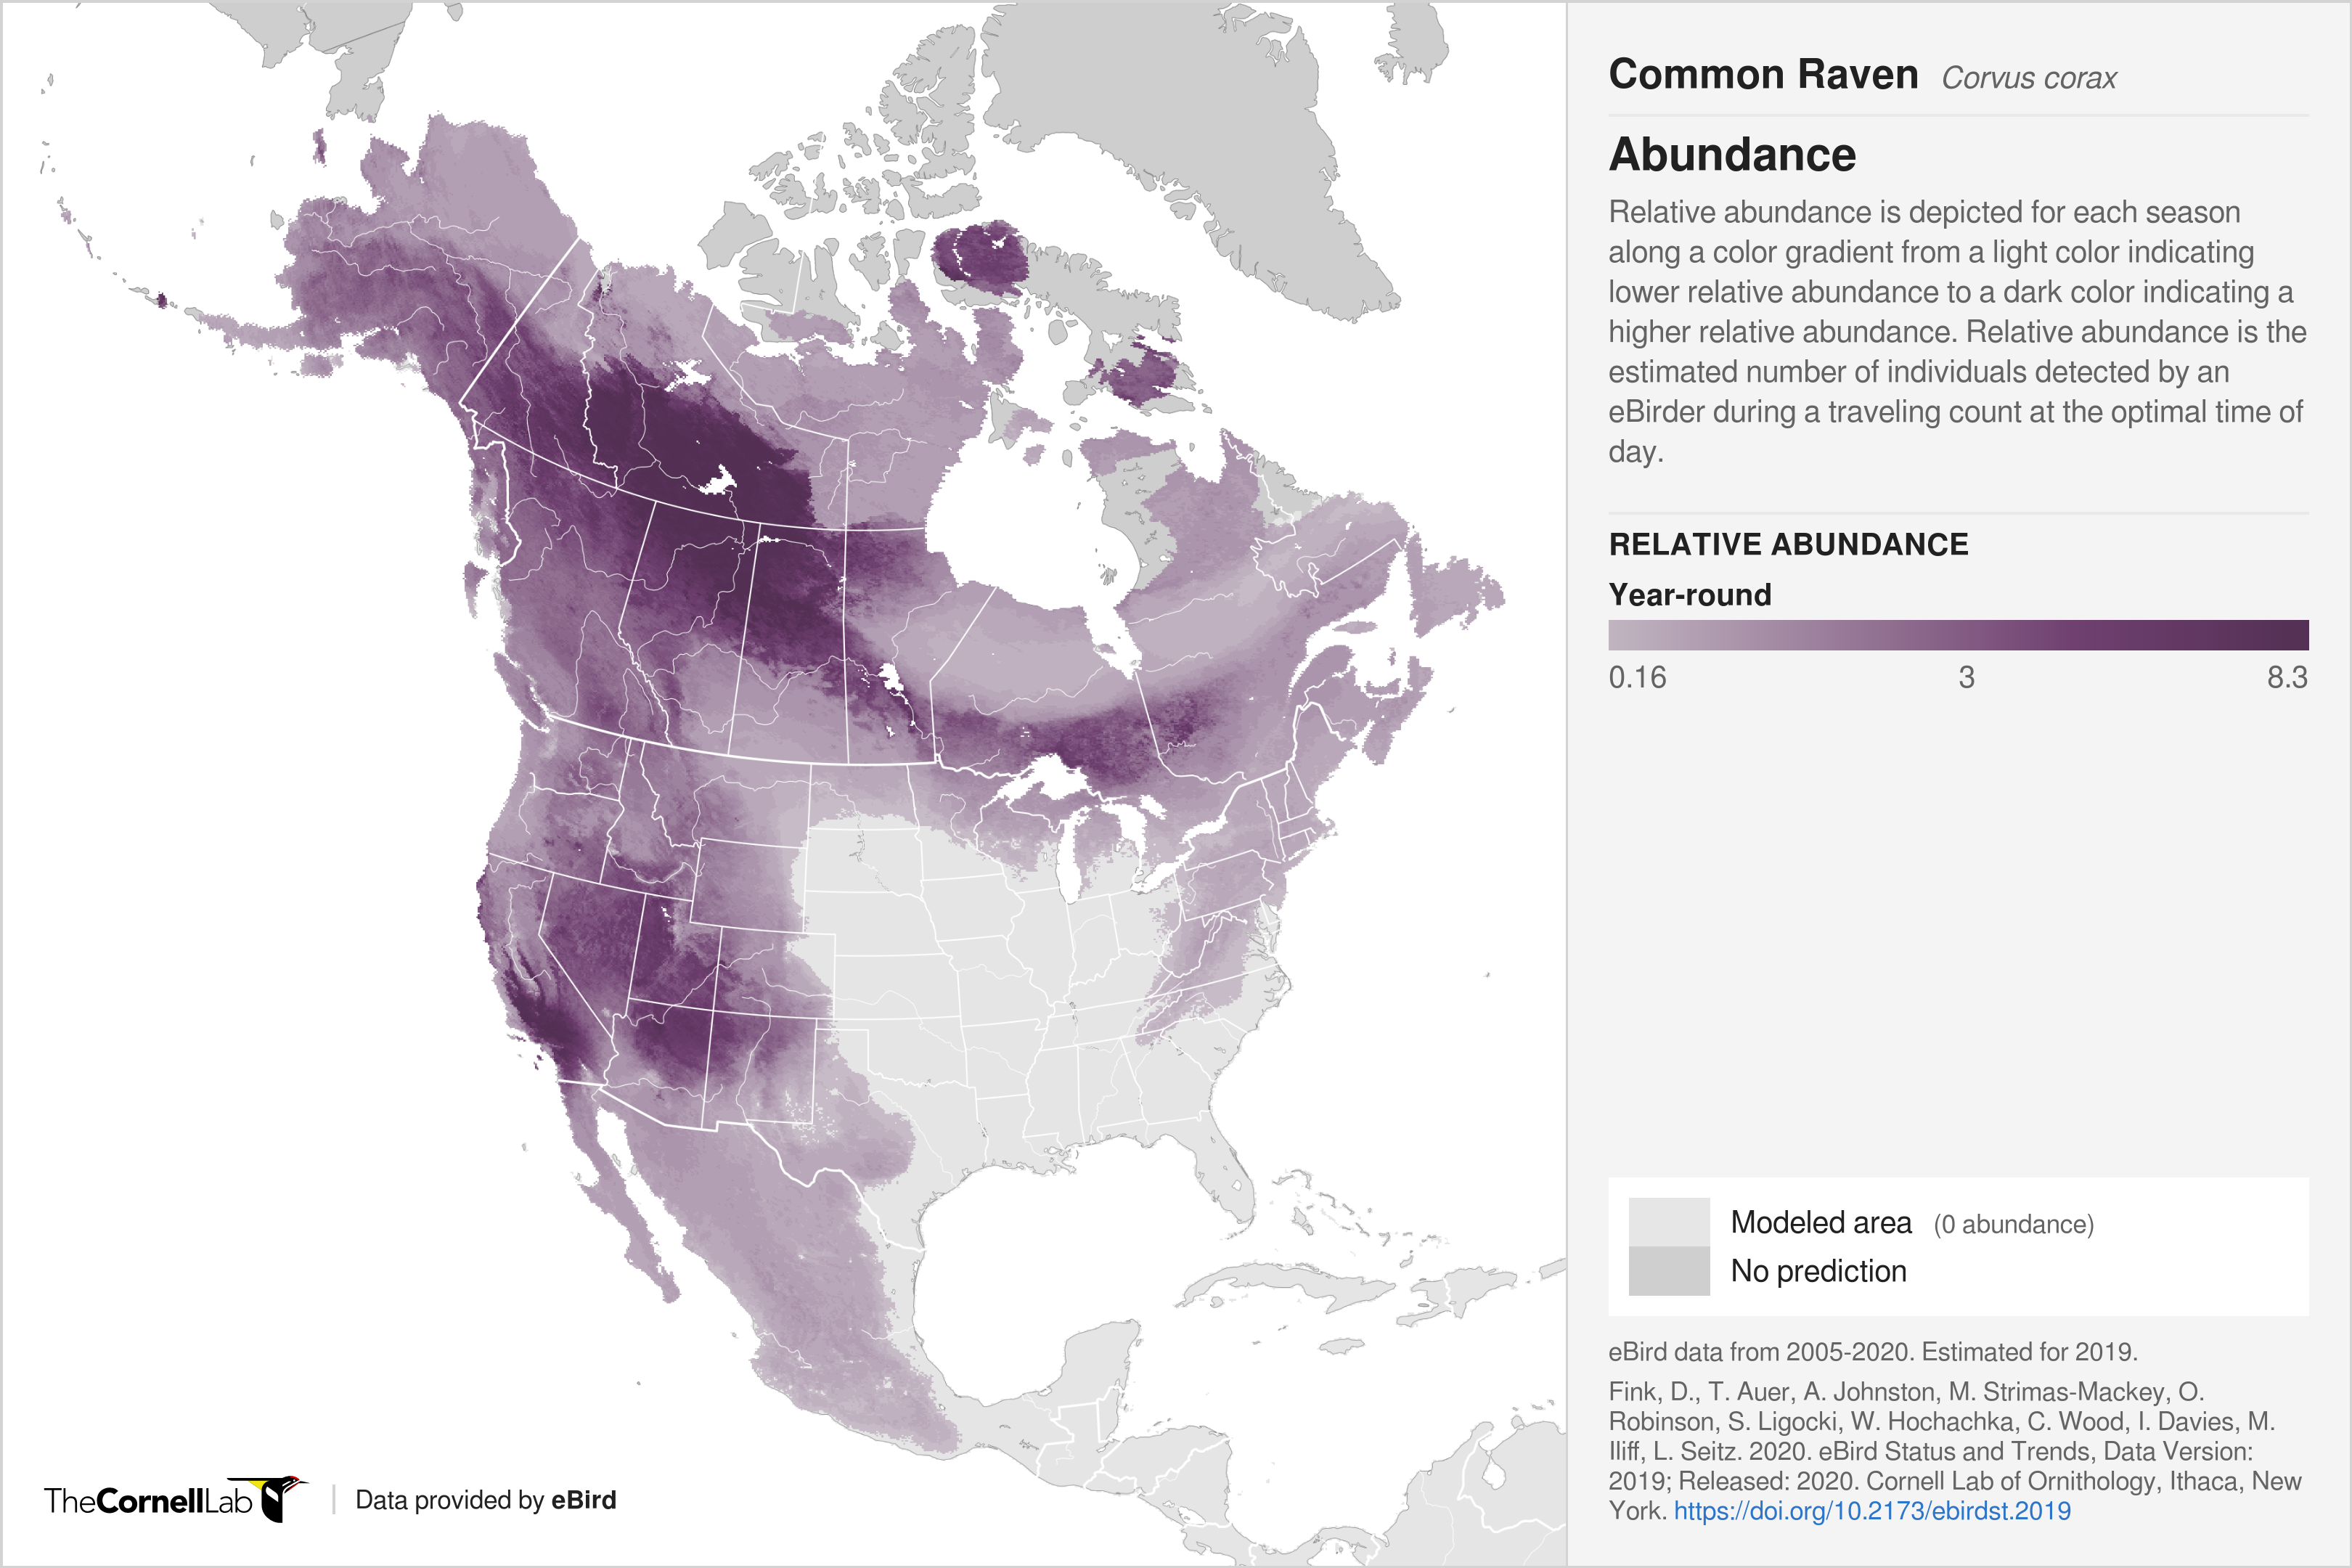 A map showing the abundance of common ravens in North America